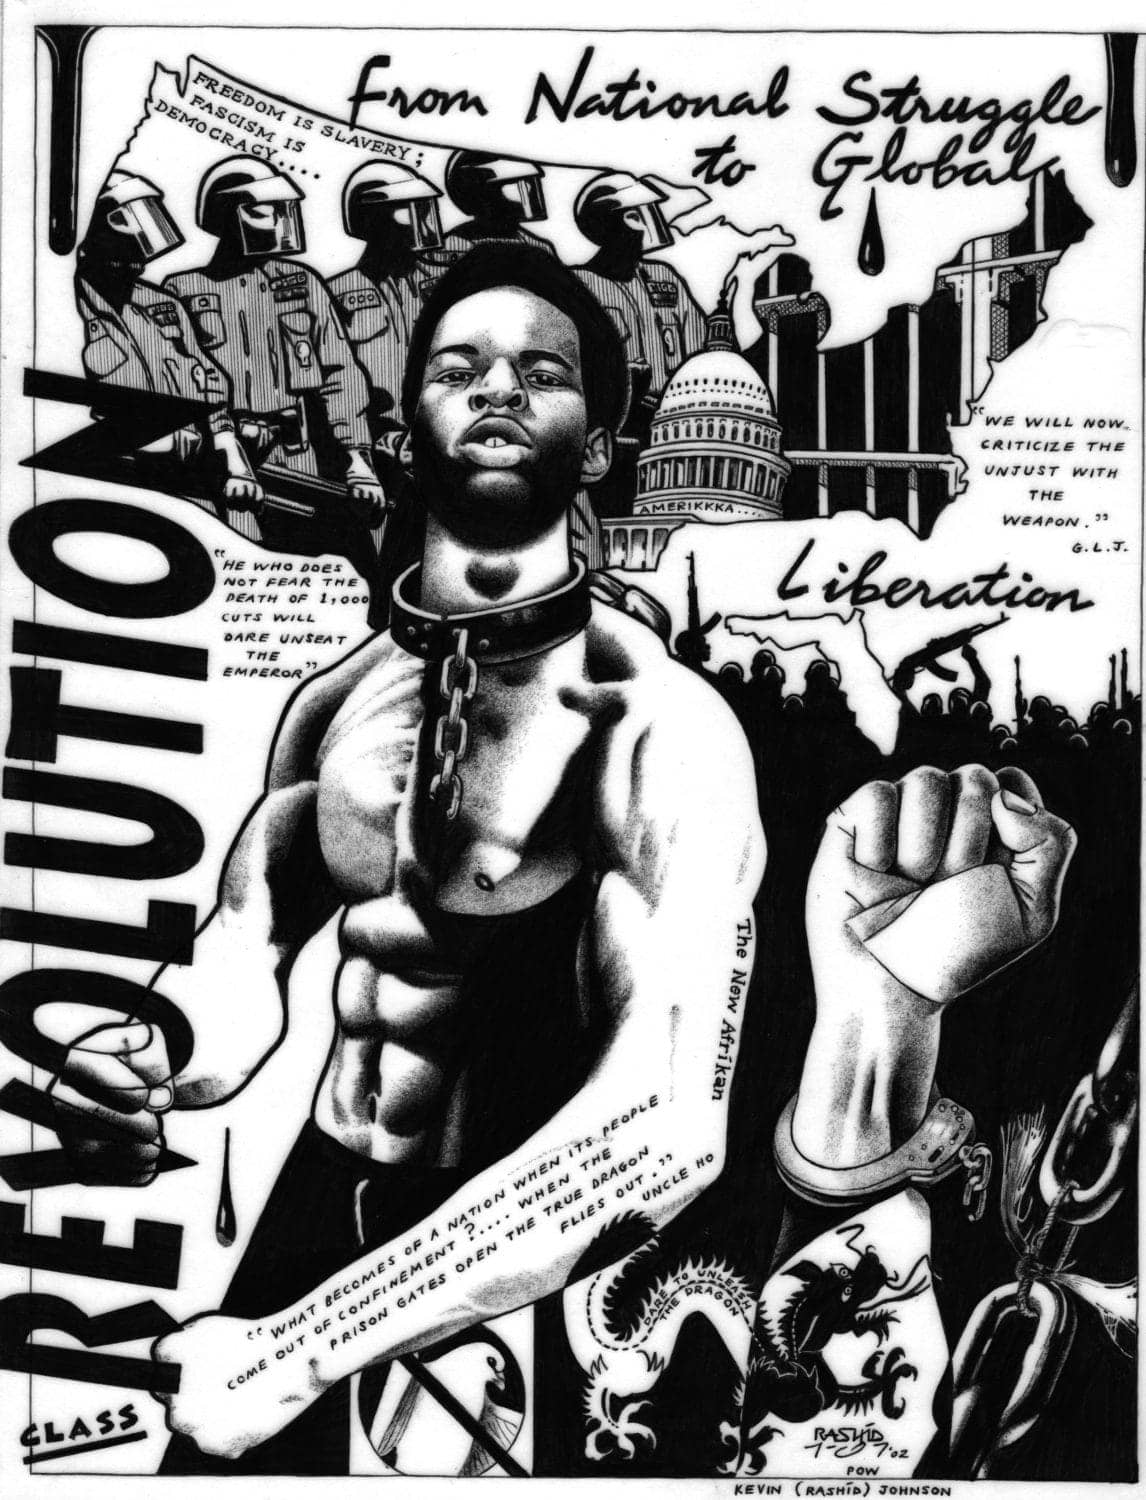 Revolution-art-by-Rashid-2002, How the pigs abuse ‘gang’ labels, Behind Enemy Lines 